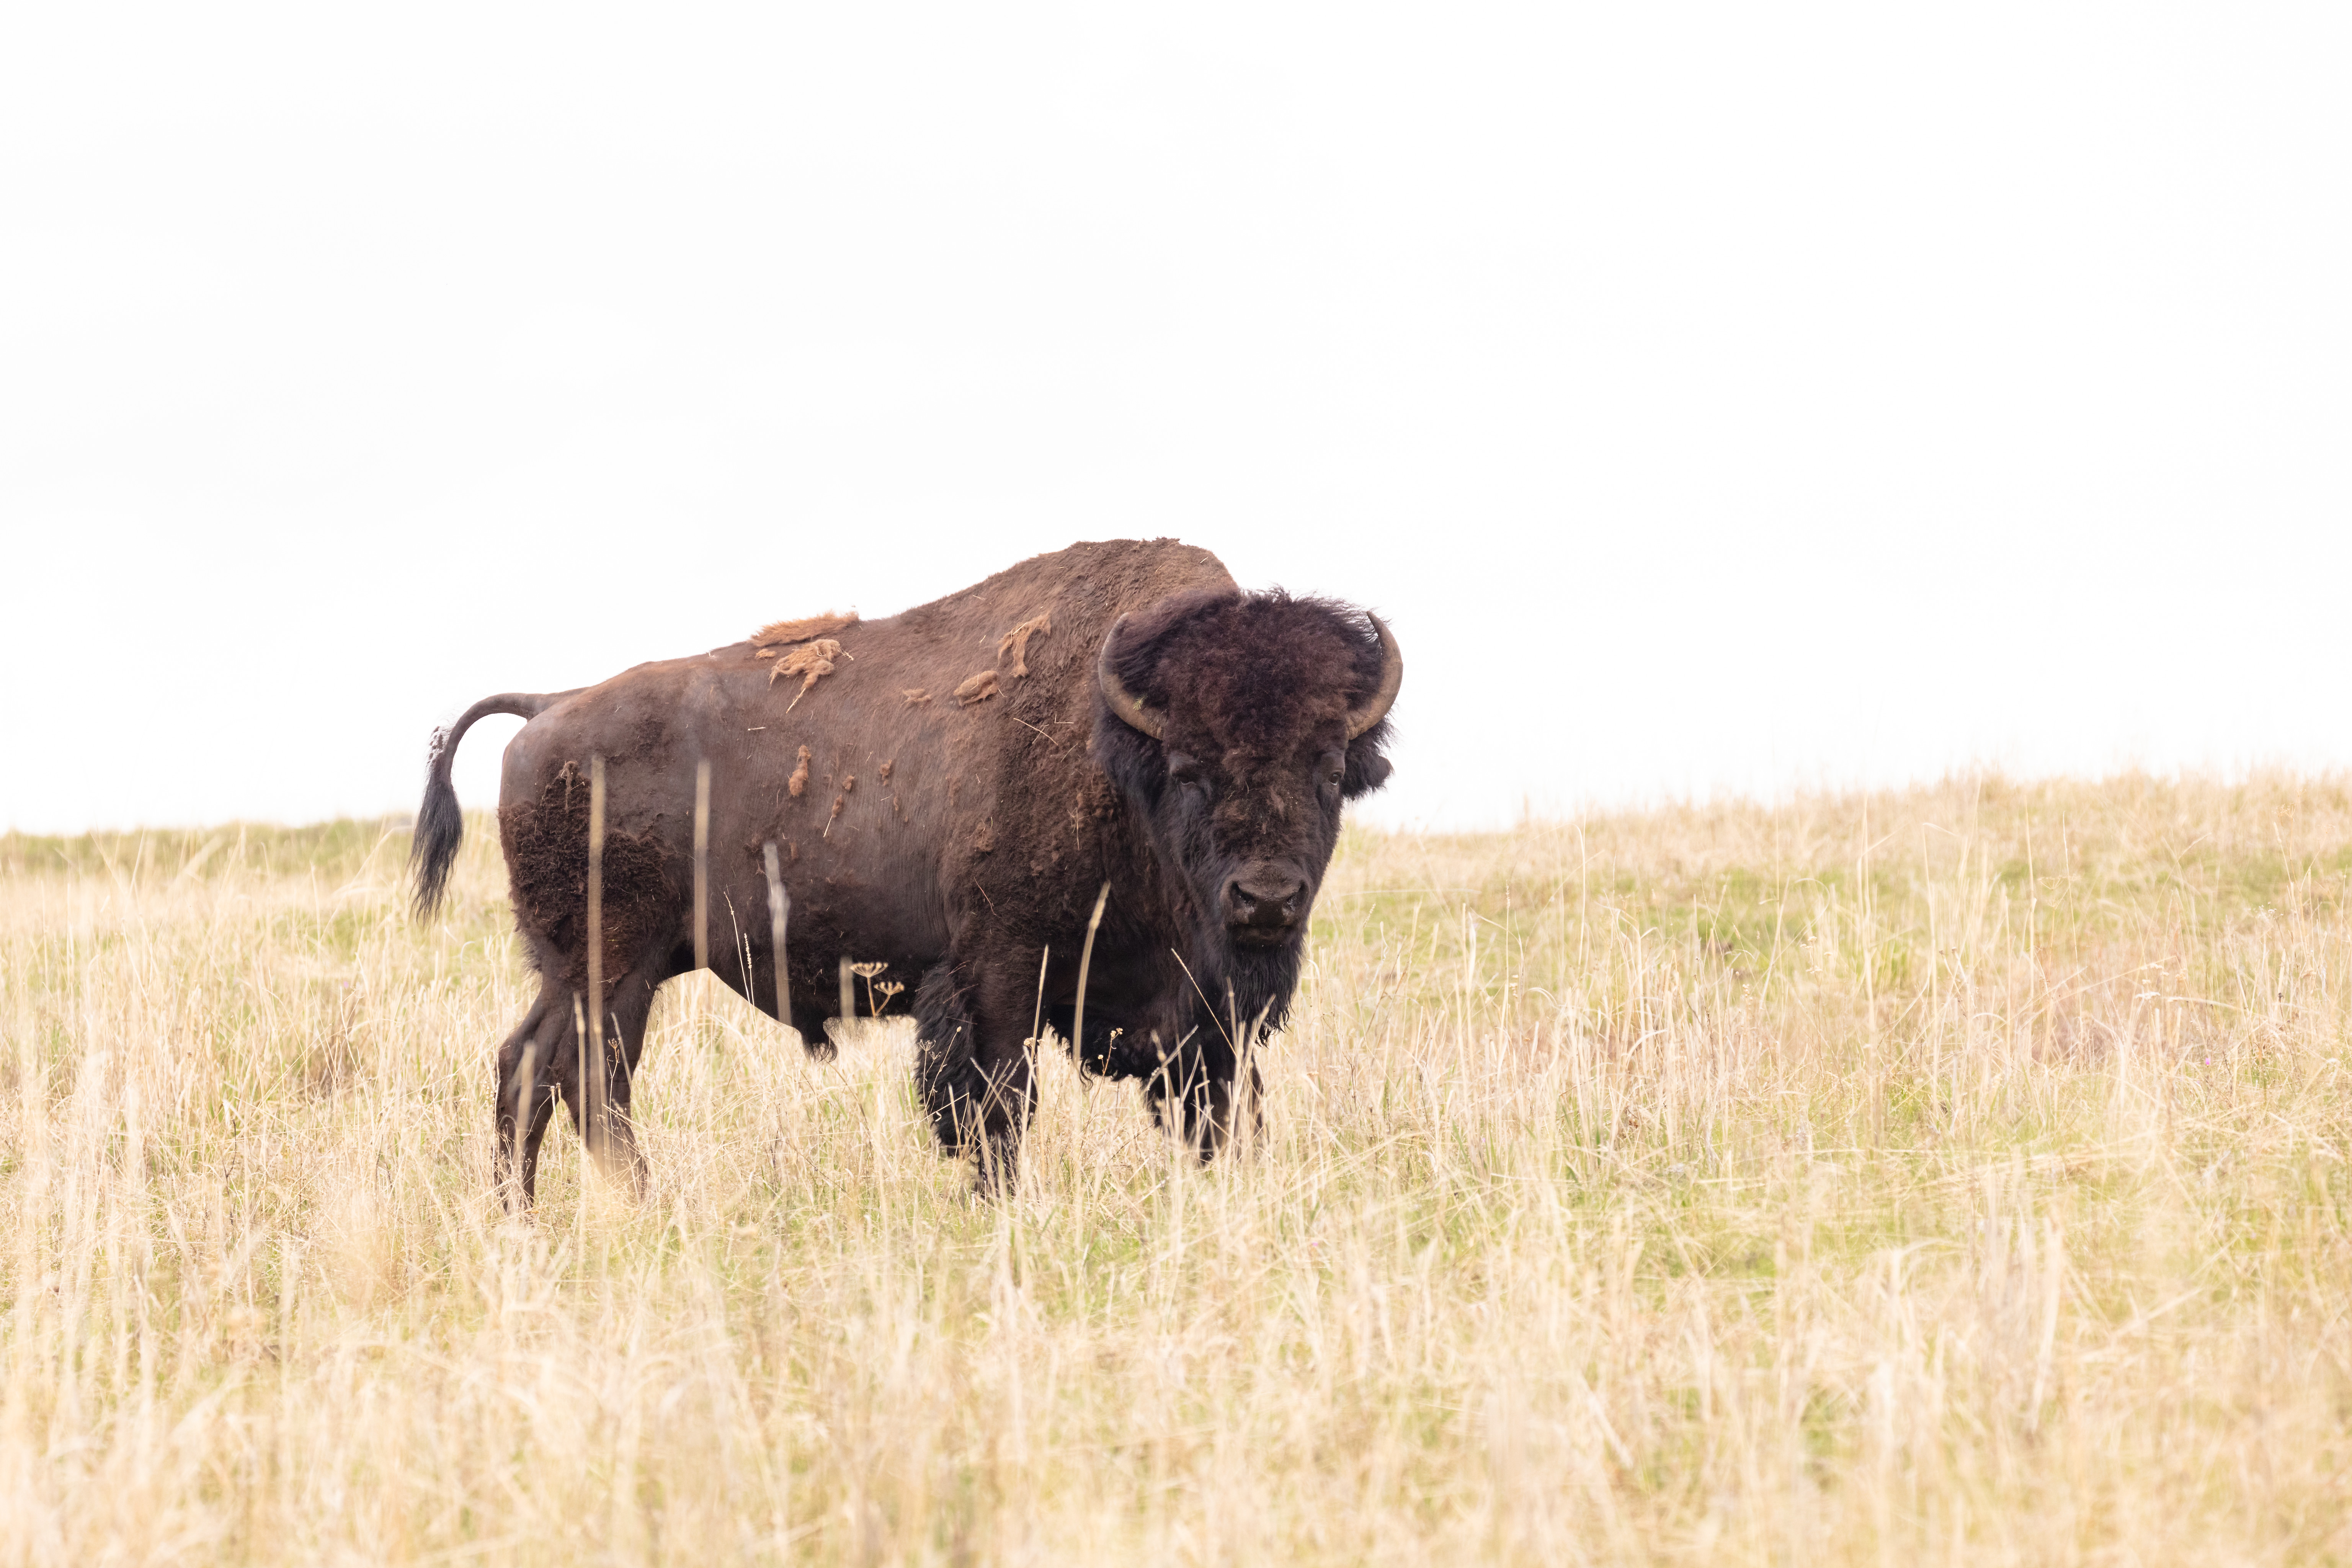 A bison standing in a field looking at the camera.